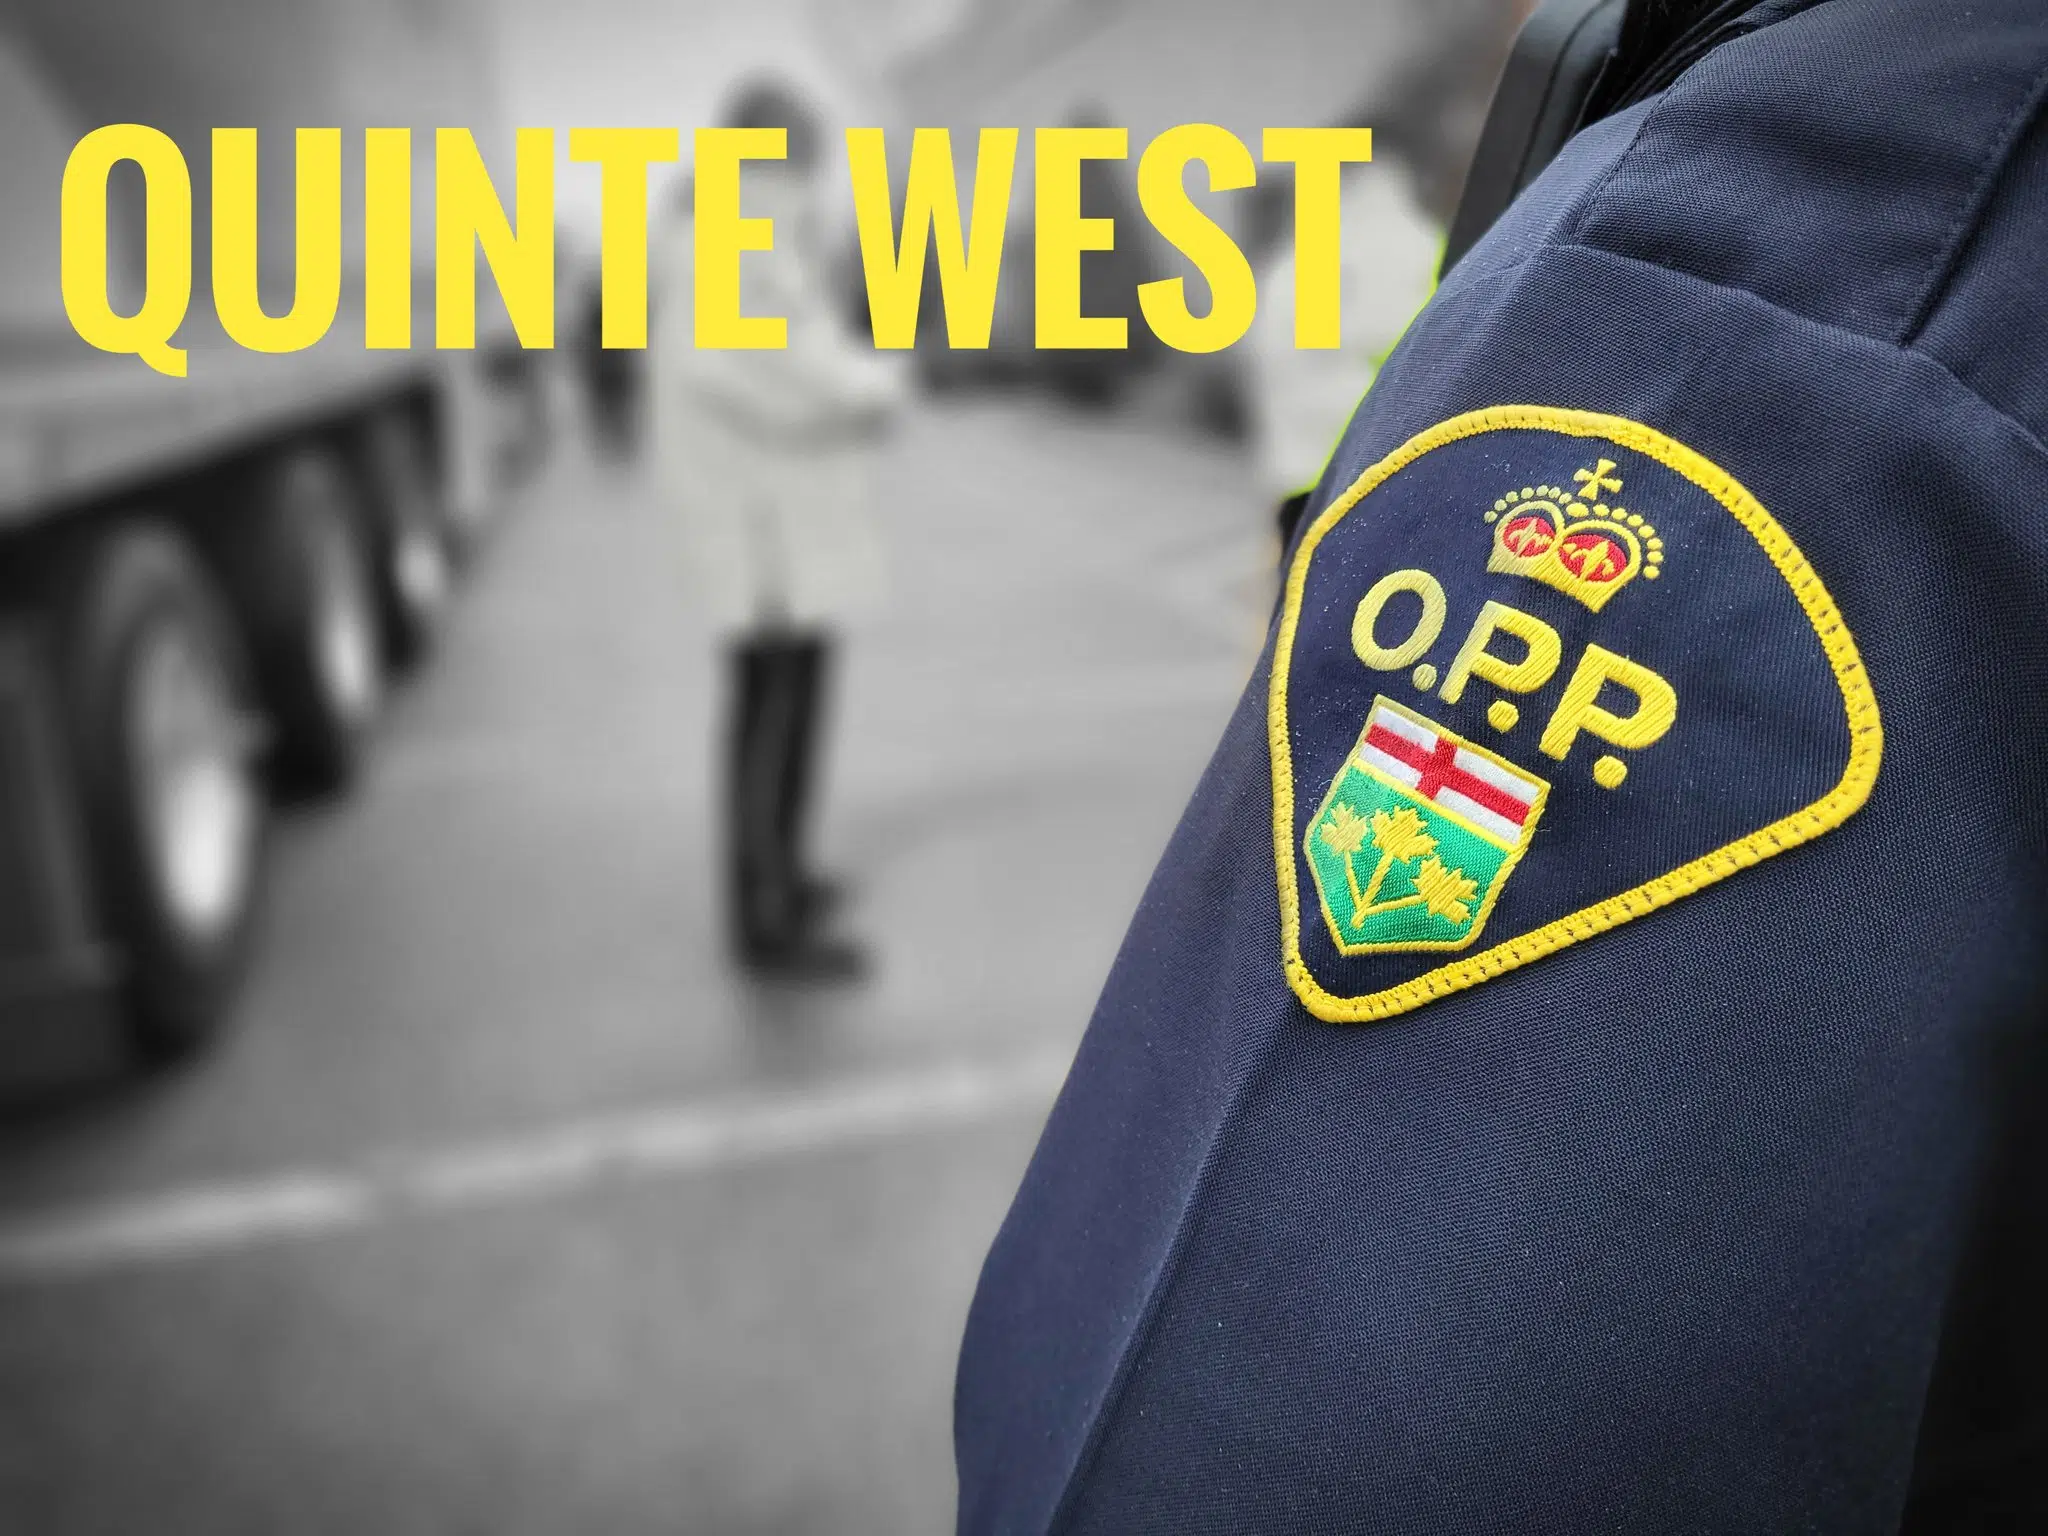 Quinte West kidnapping incident, another suspect wanted